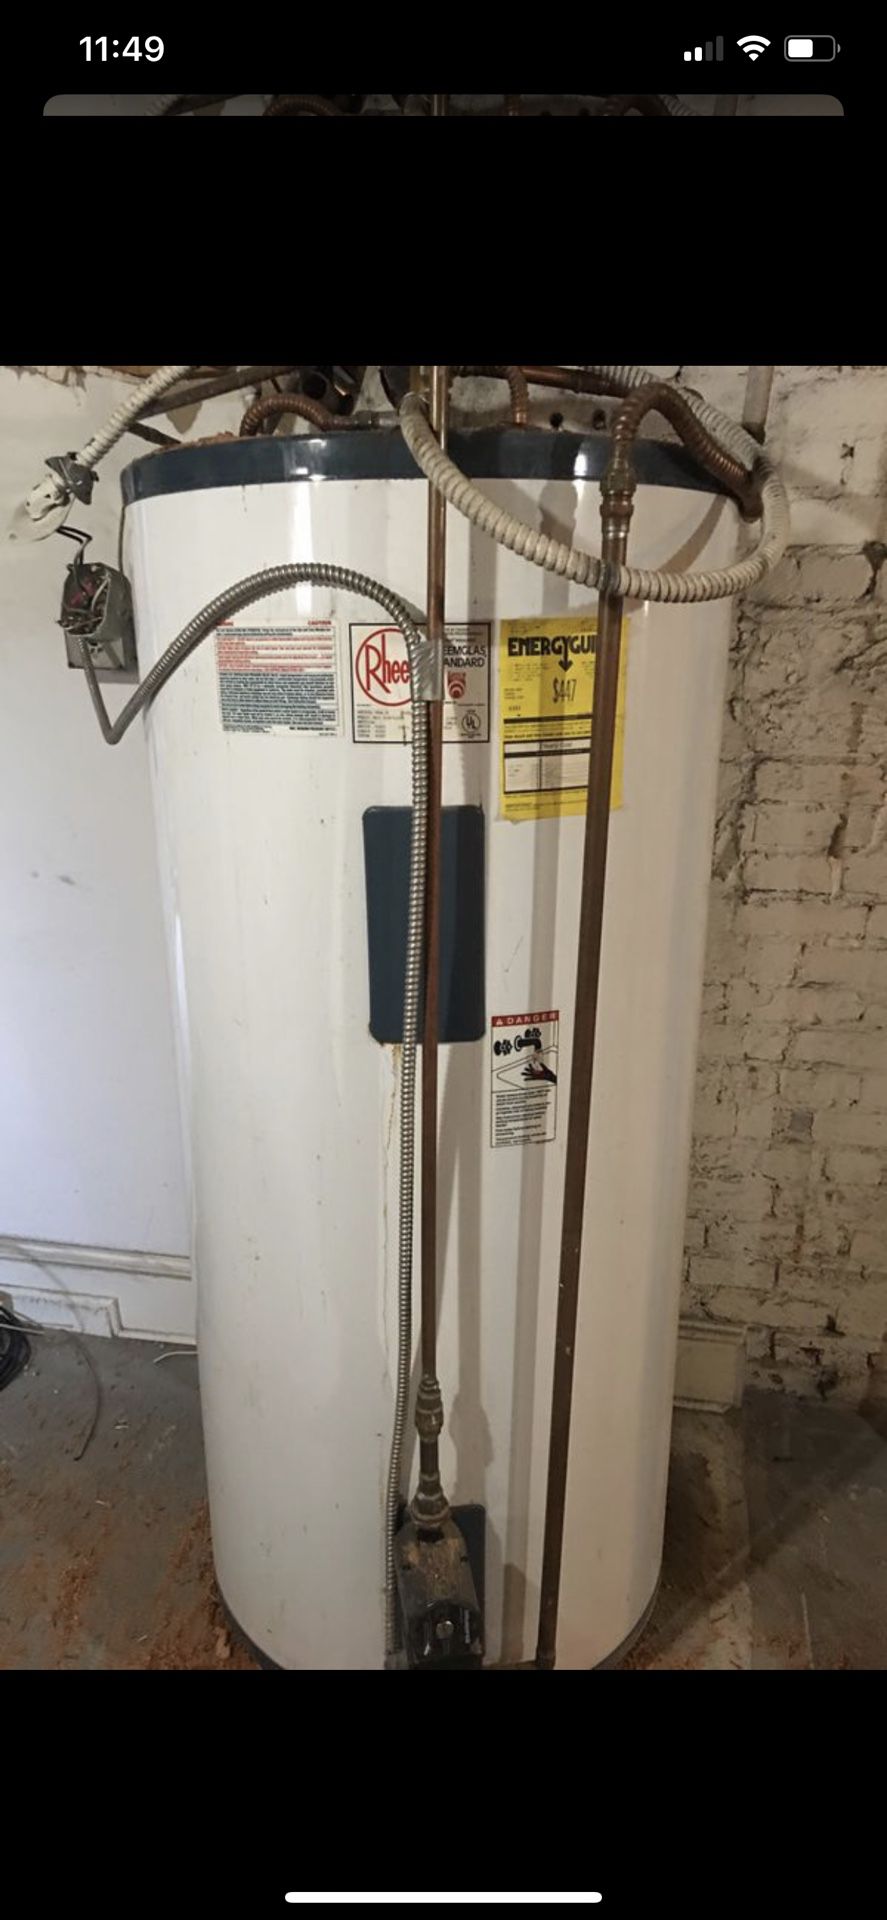 FREE! 120 Gallon Hot water heater (electric)